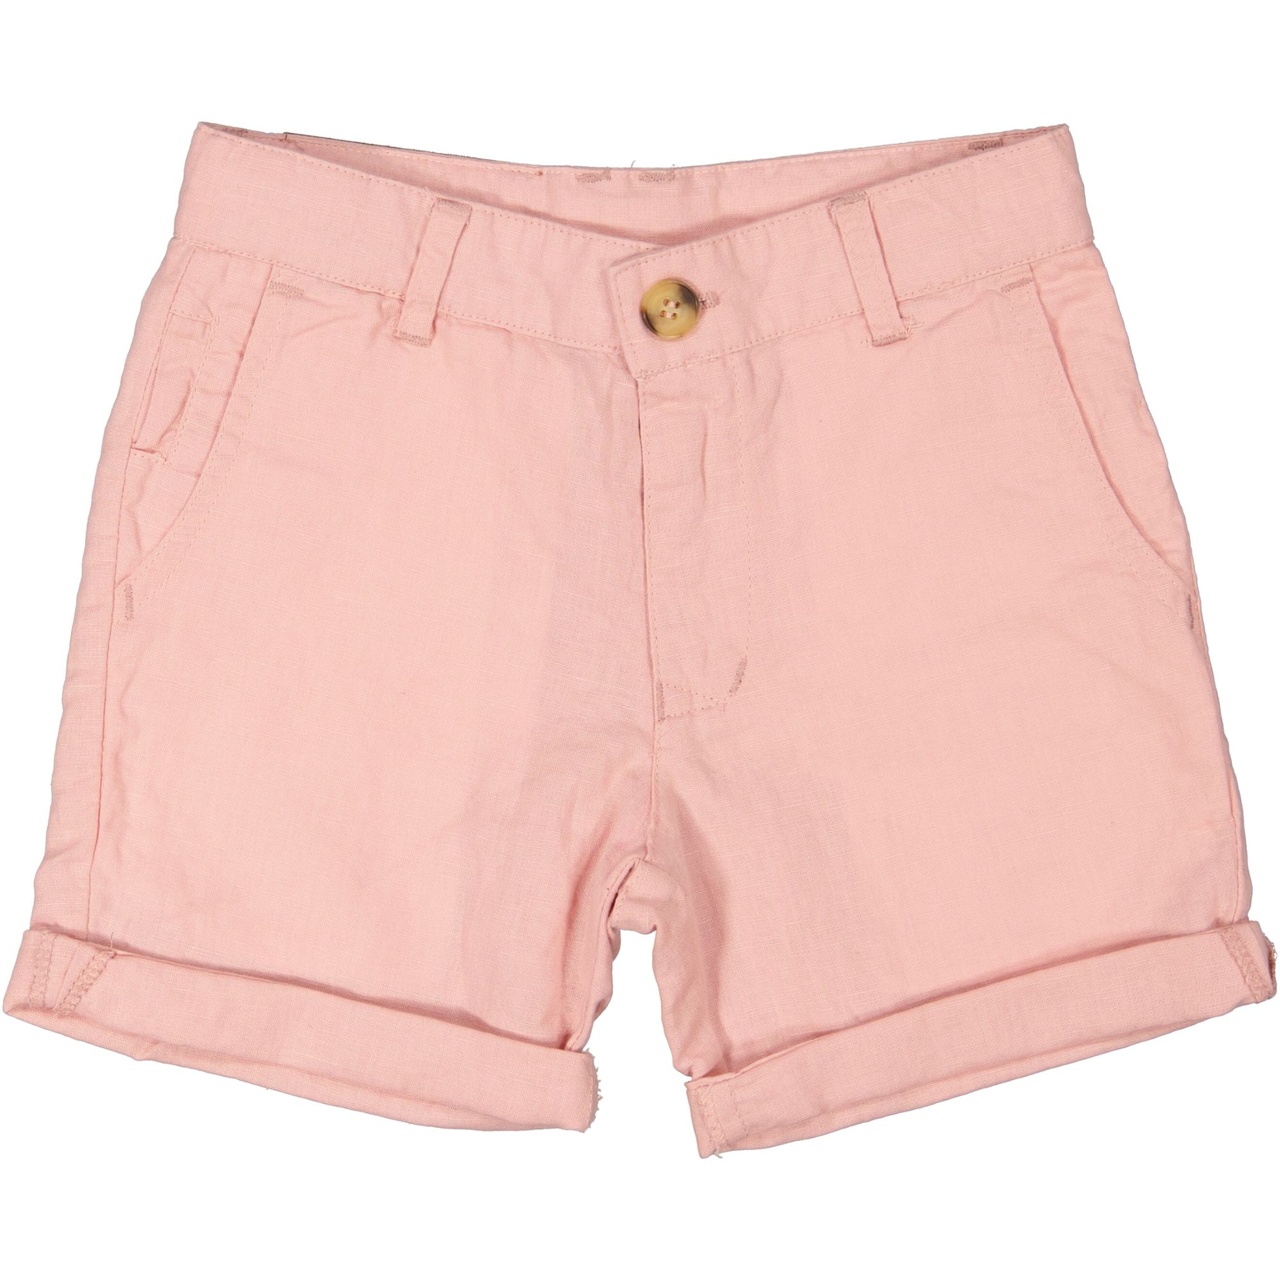 Linnen shorts Old pink 146/152